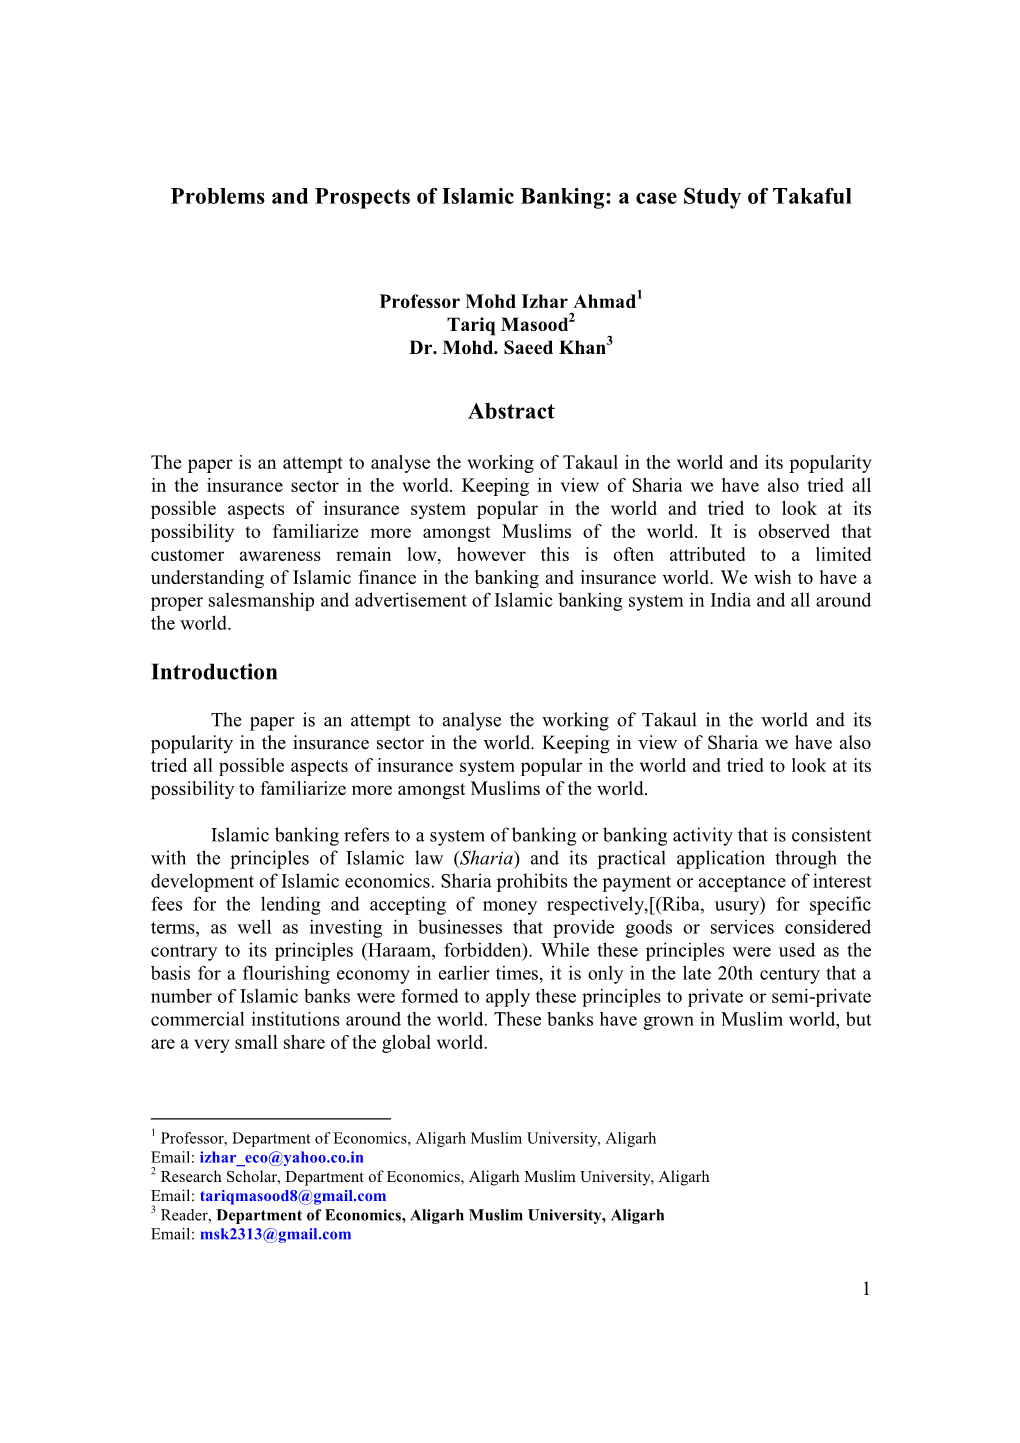 Problems and Prospects of Islamic Banking: a Case Study of Takaful